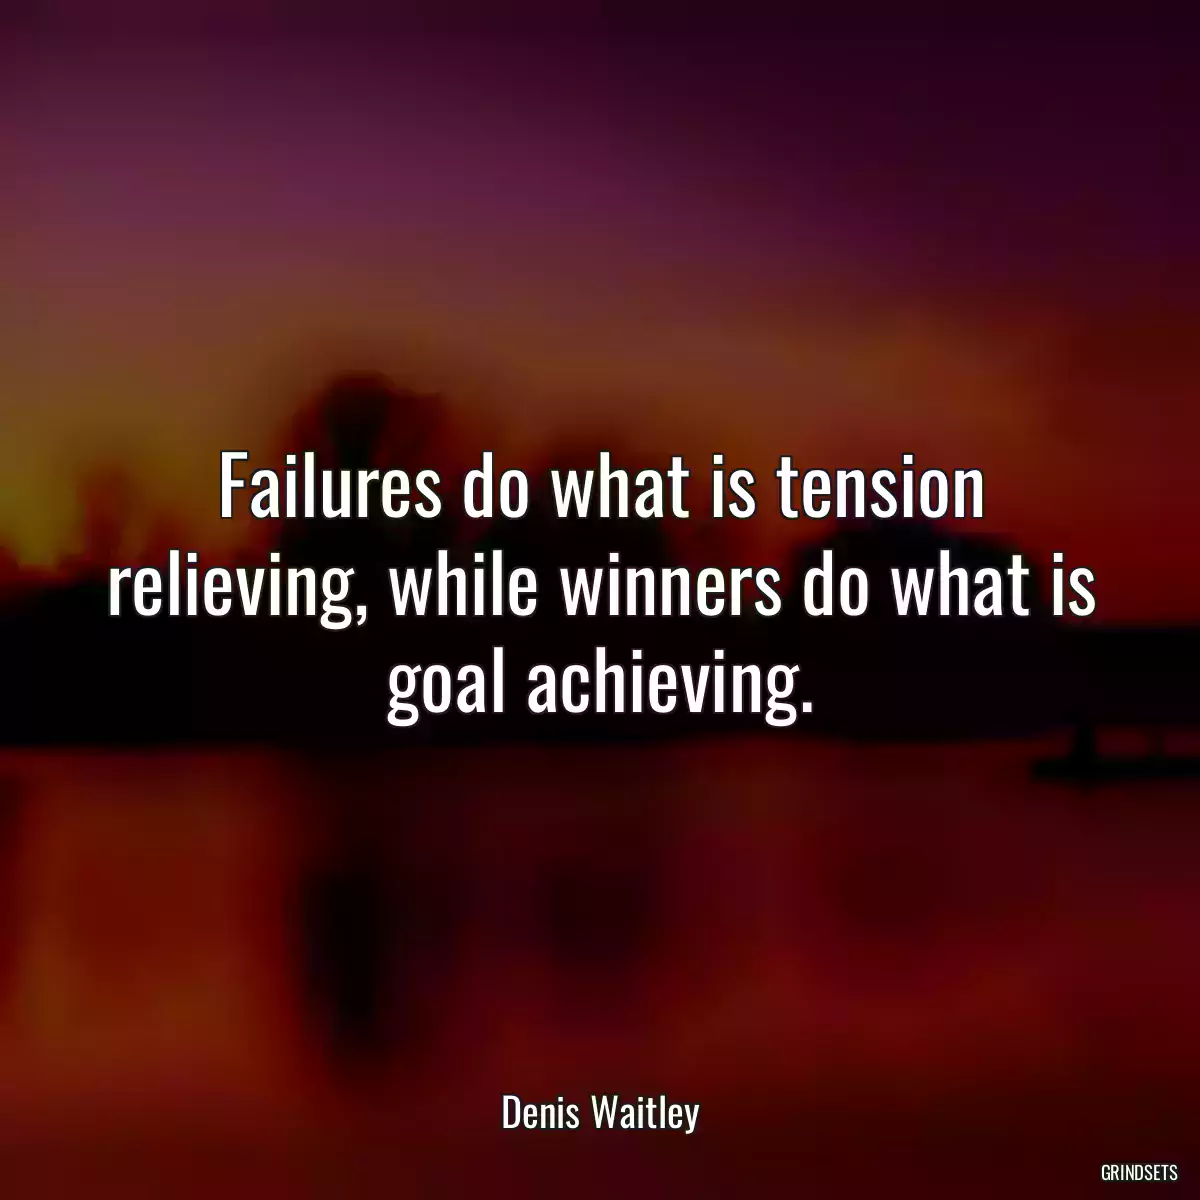 Failures do what is tension relieving, while winners do what is goal achieving.